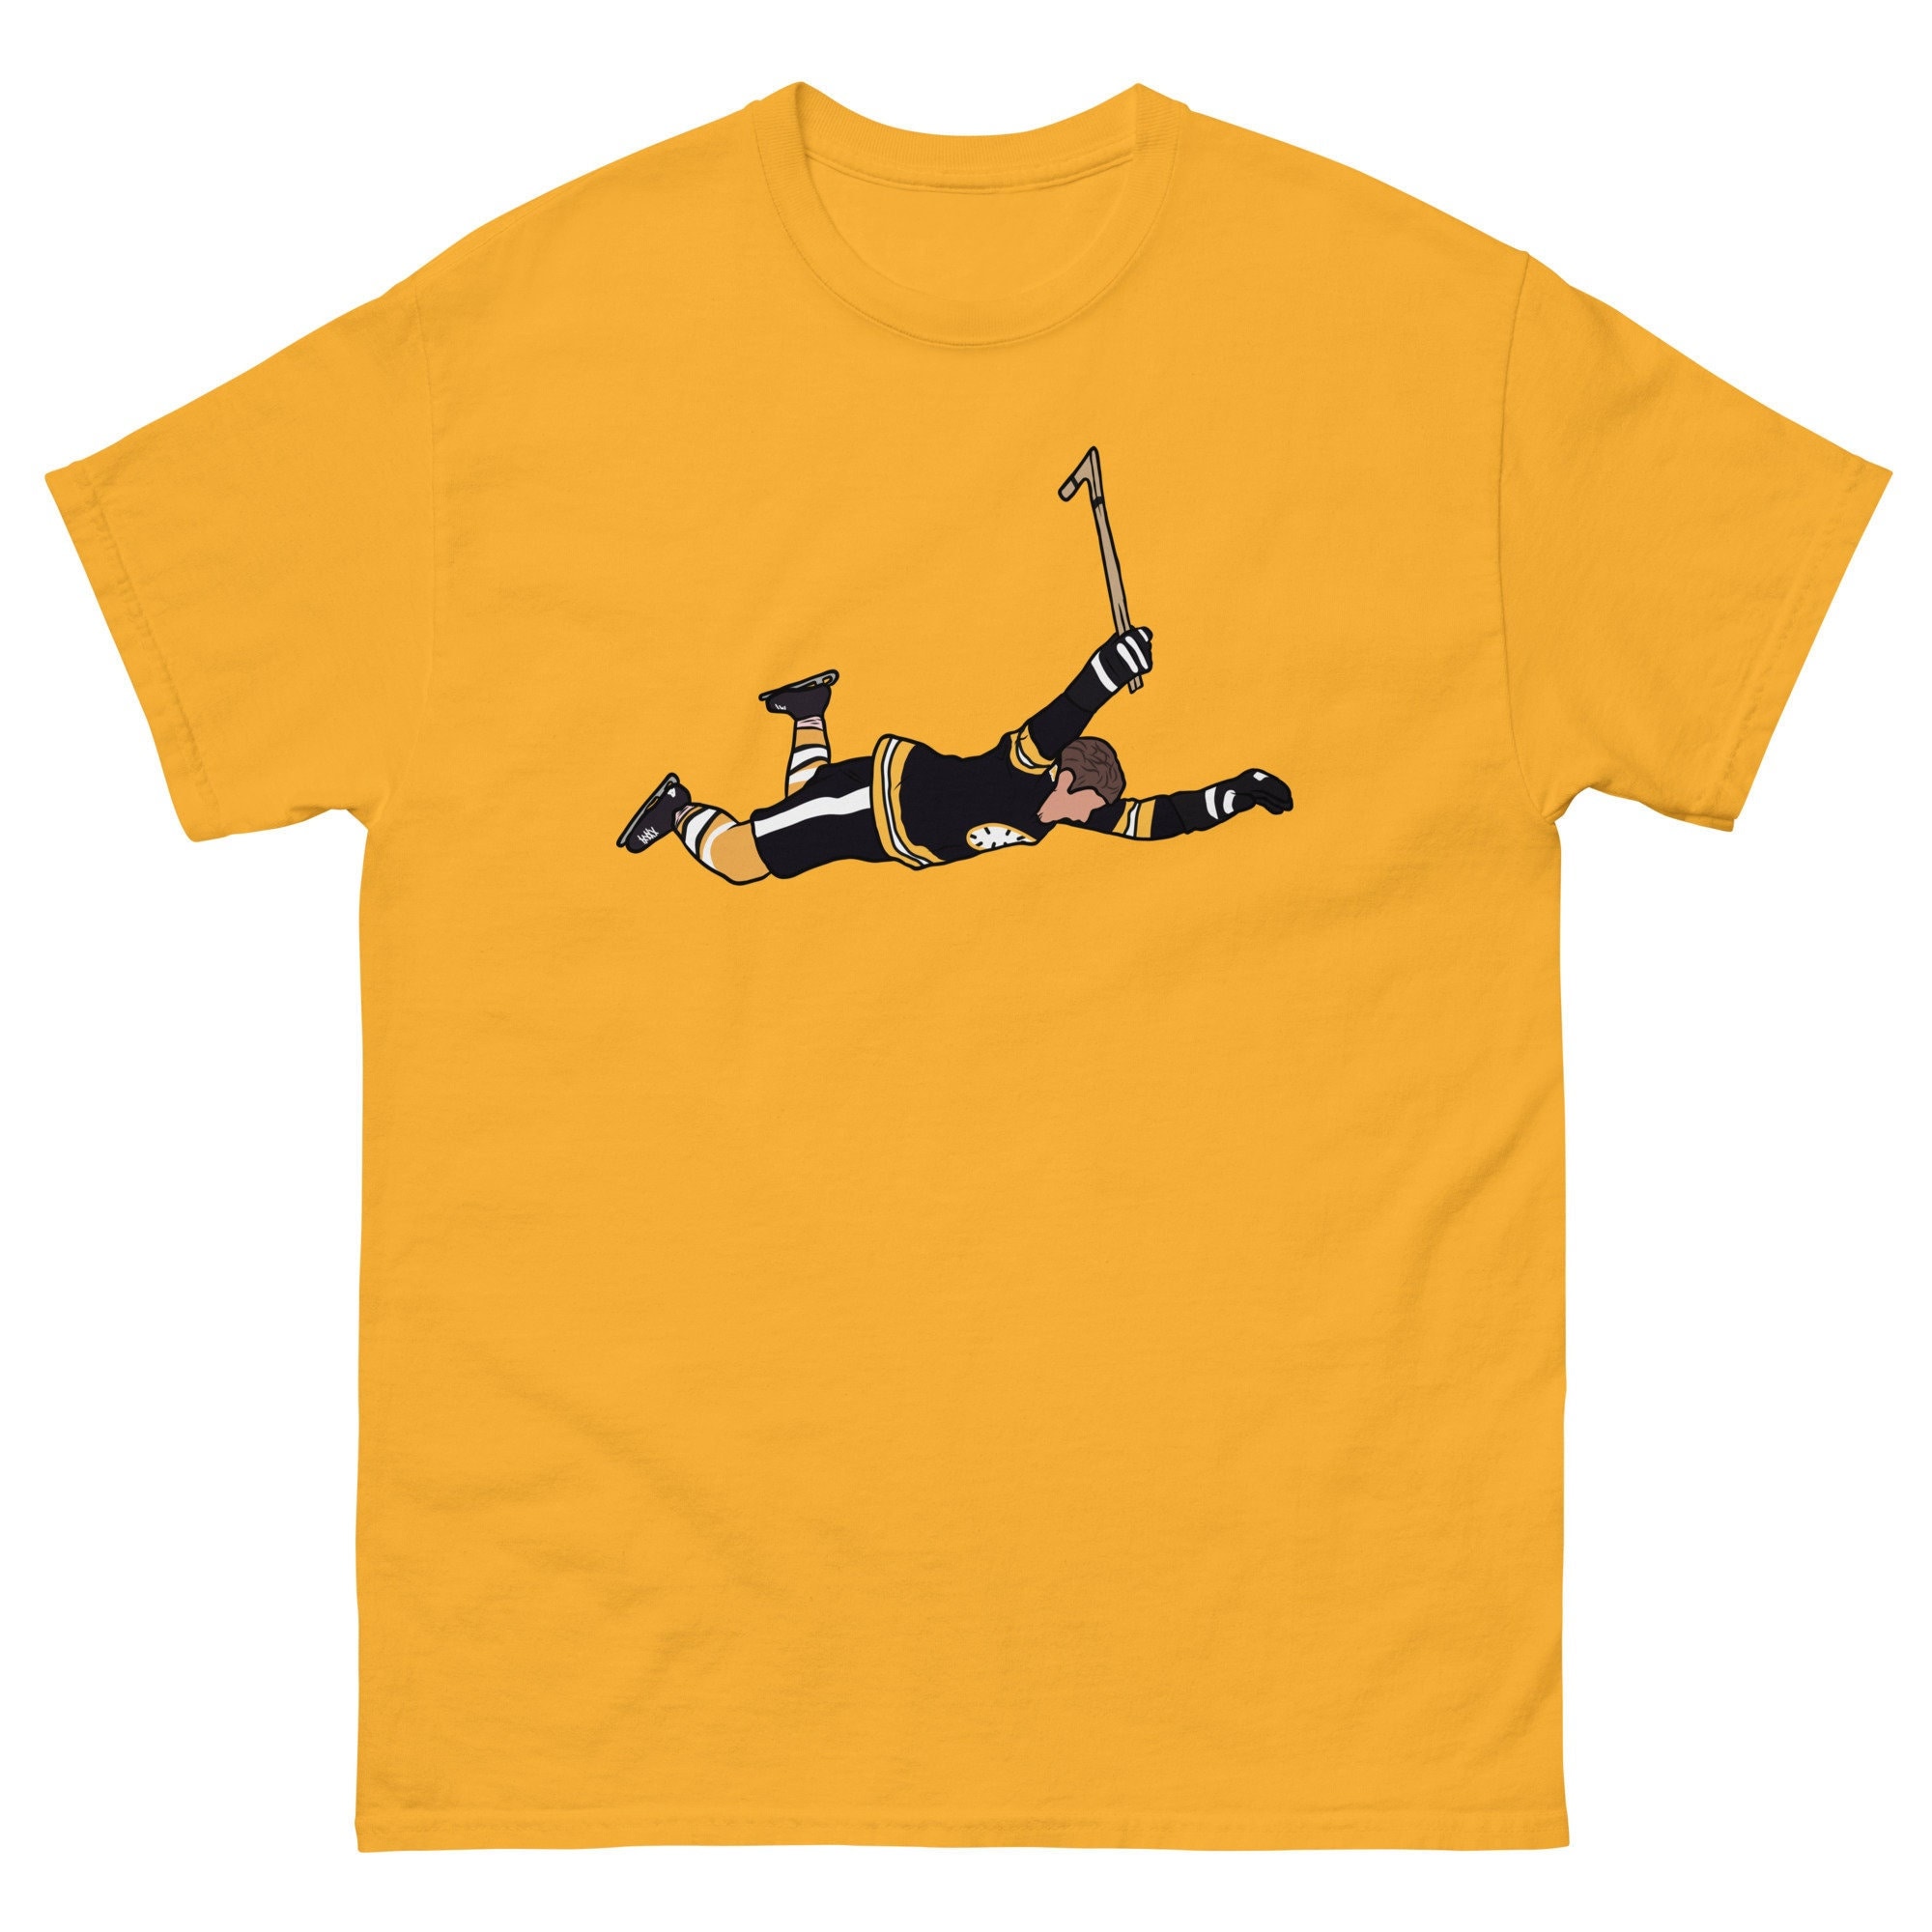 Bruins Shirt Bobby Orr Victoriaville Boston Bruins Gift - Personalized  Gifts: Family, Sports, Occasions, Trending